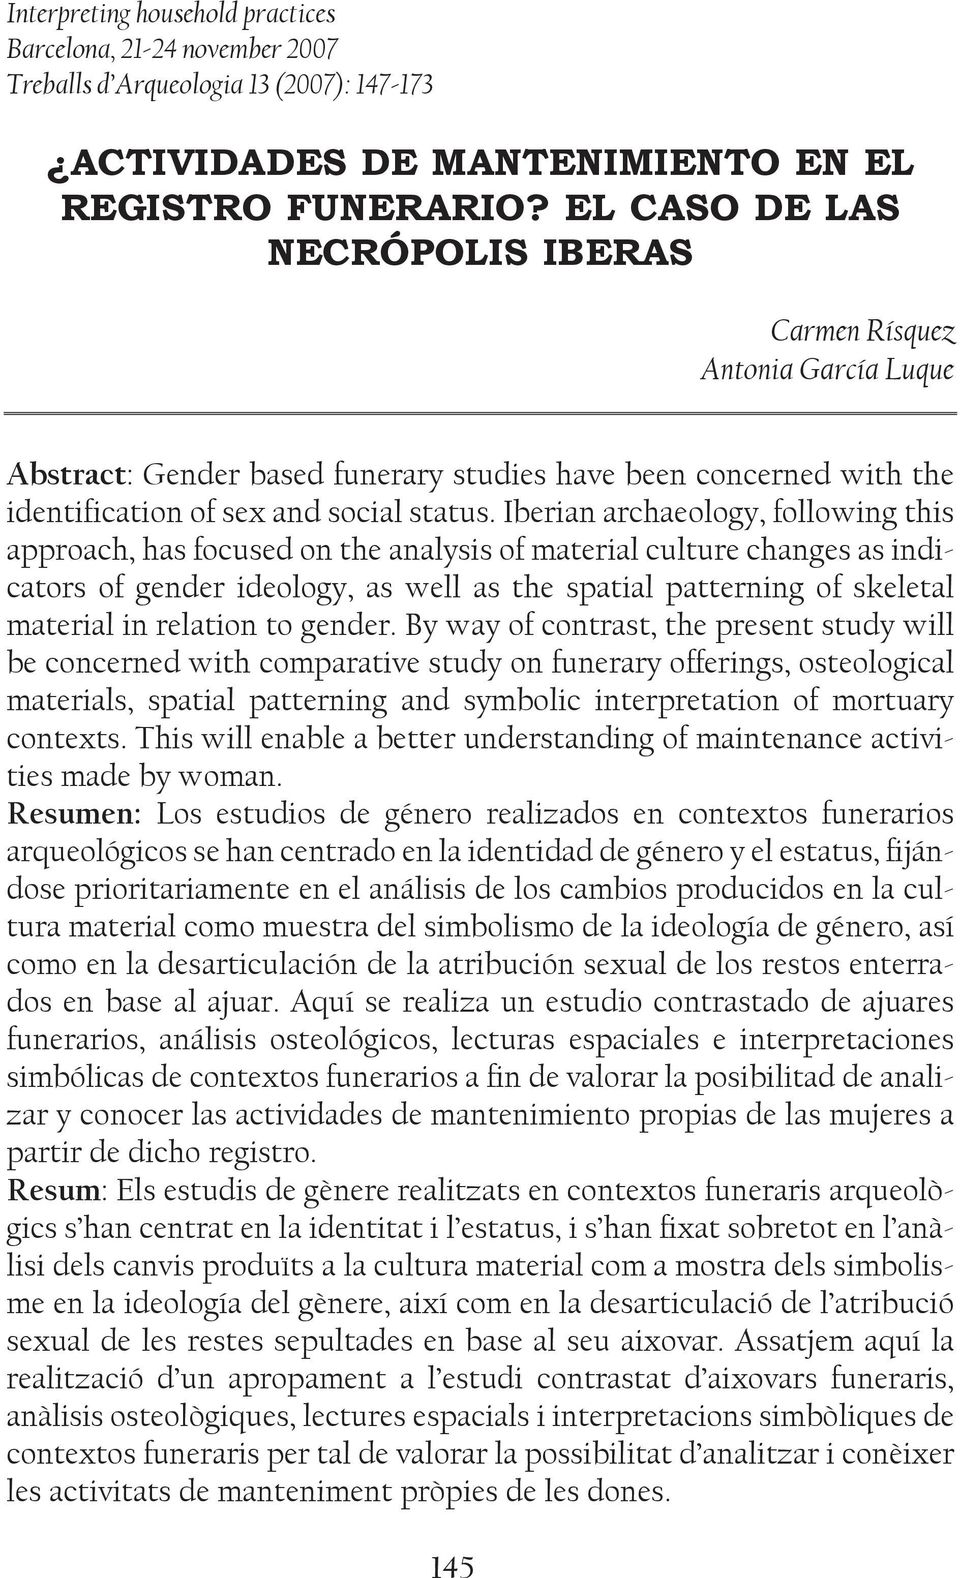 Iberian archaeology, following this approach, has focused on the analysis of material culture changes as indicators of gender ideology, as well as the spatial patterning of skeletal material in